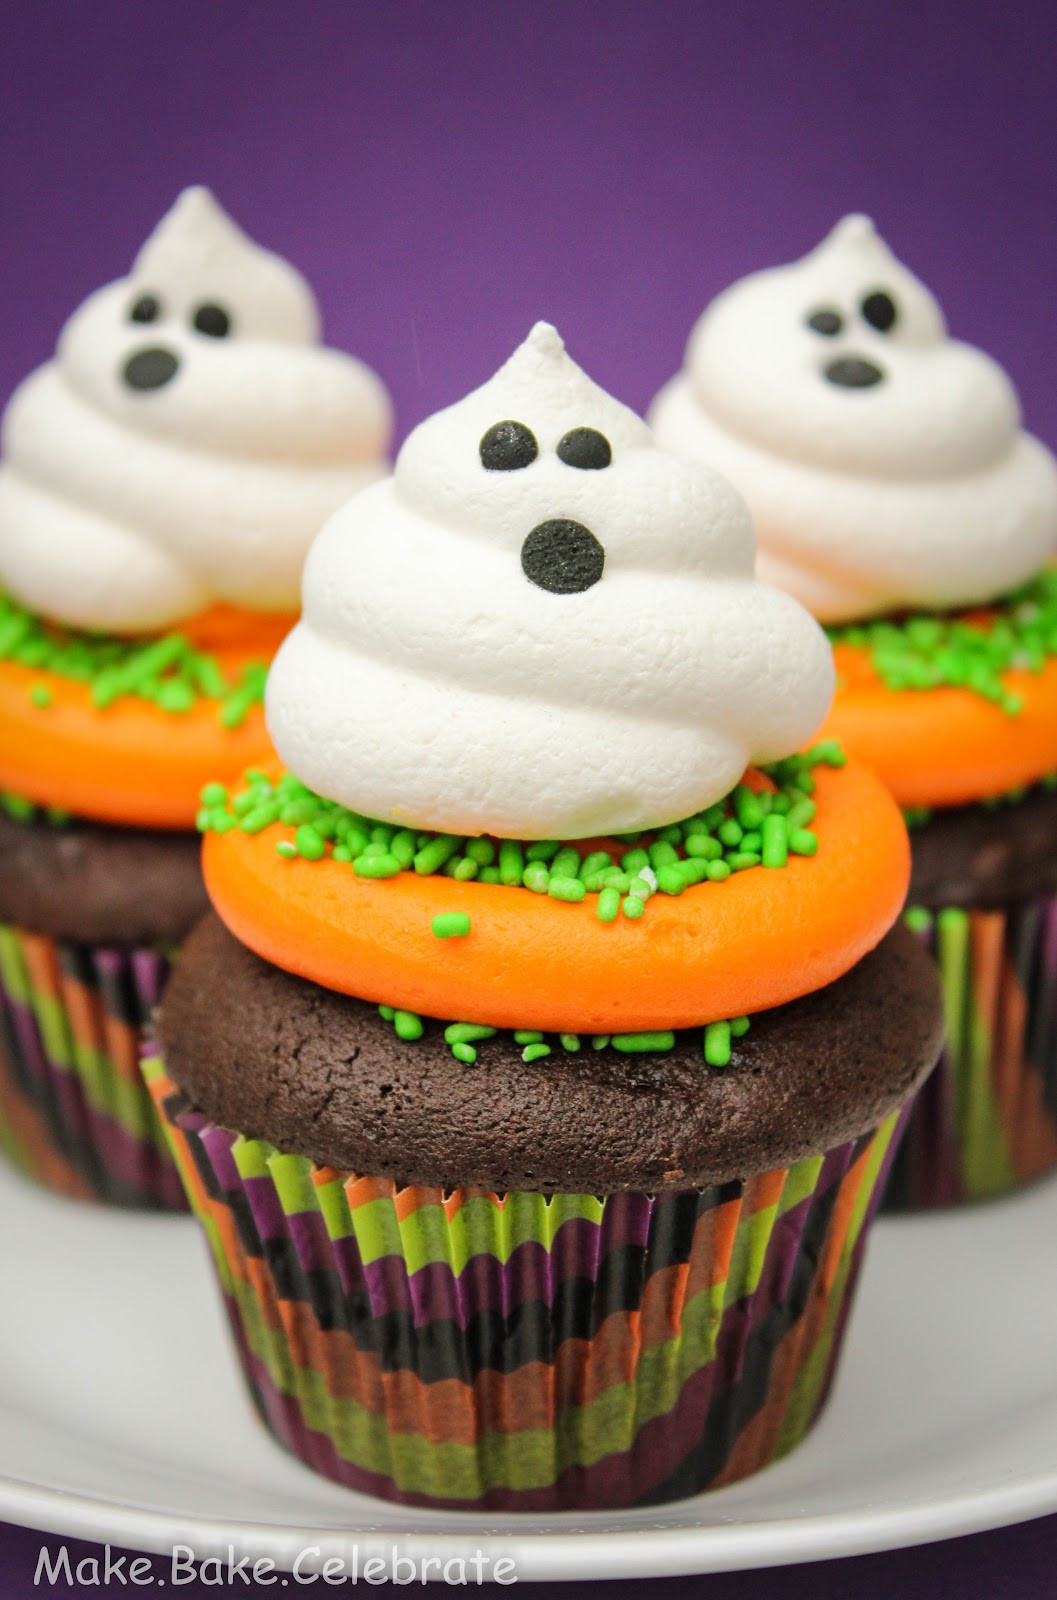 Halloween Cupcakes Pictures
 MBC Boo tiful cupcakes d some BIG news